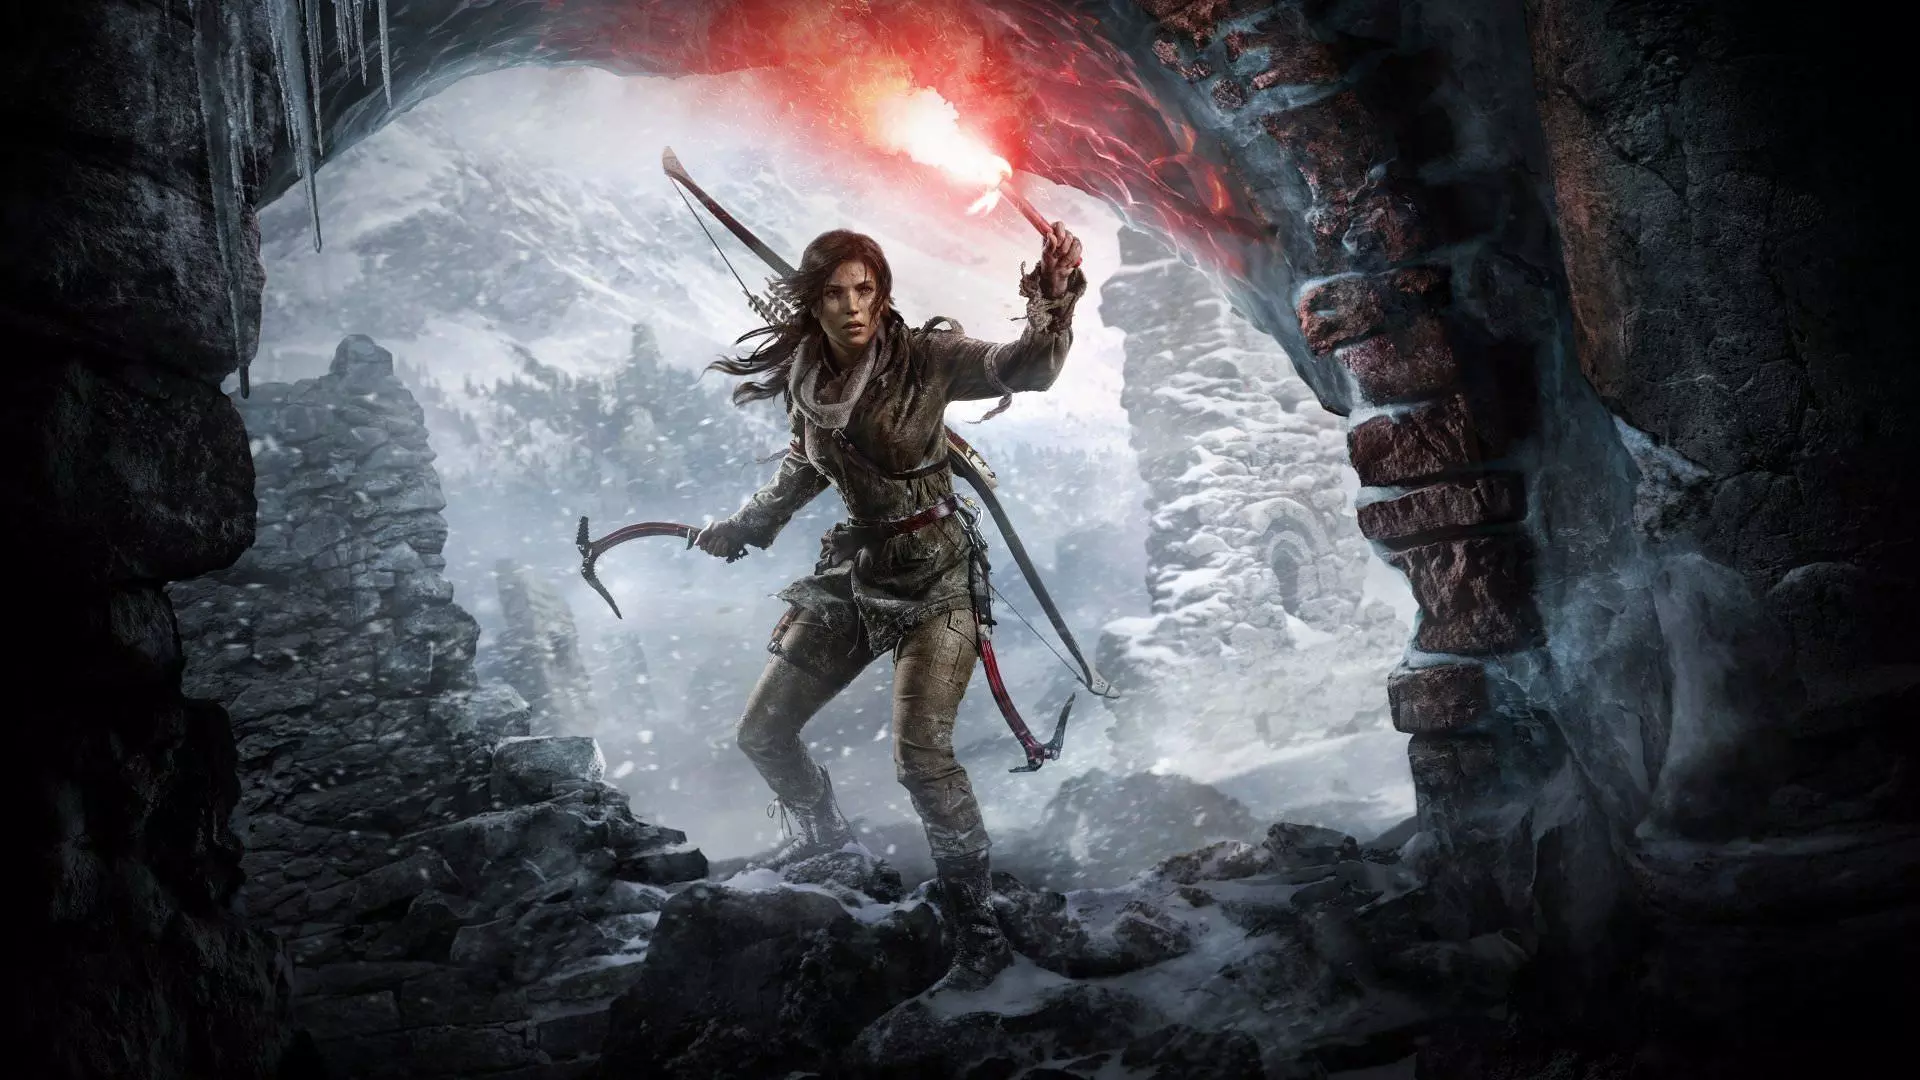 rise of the tomb raider wallpaper  Image of rise of the tomb raider wallpaper